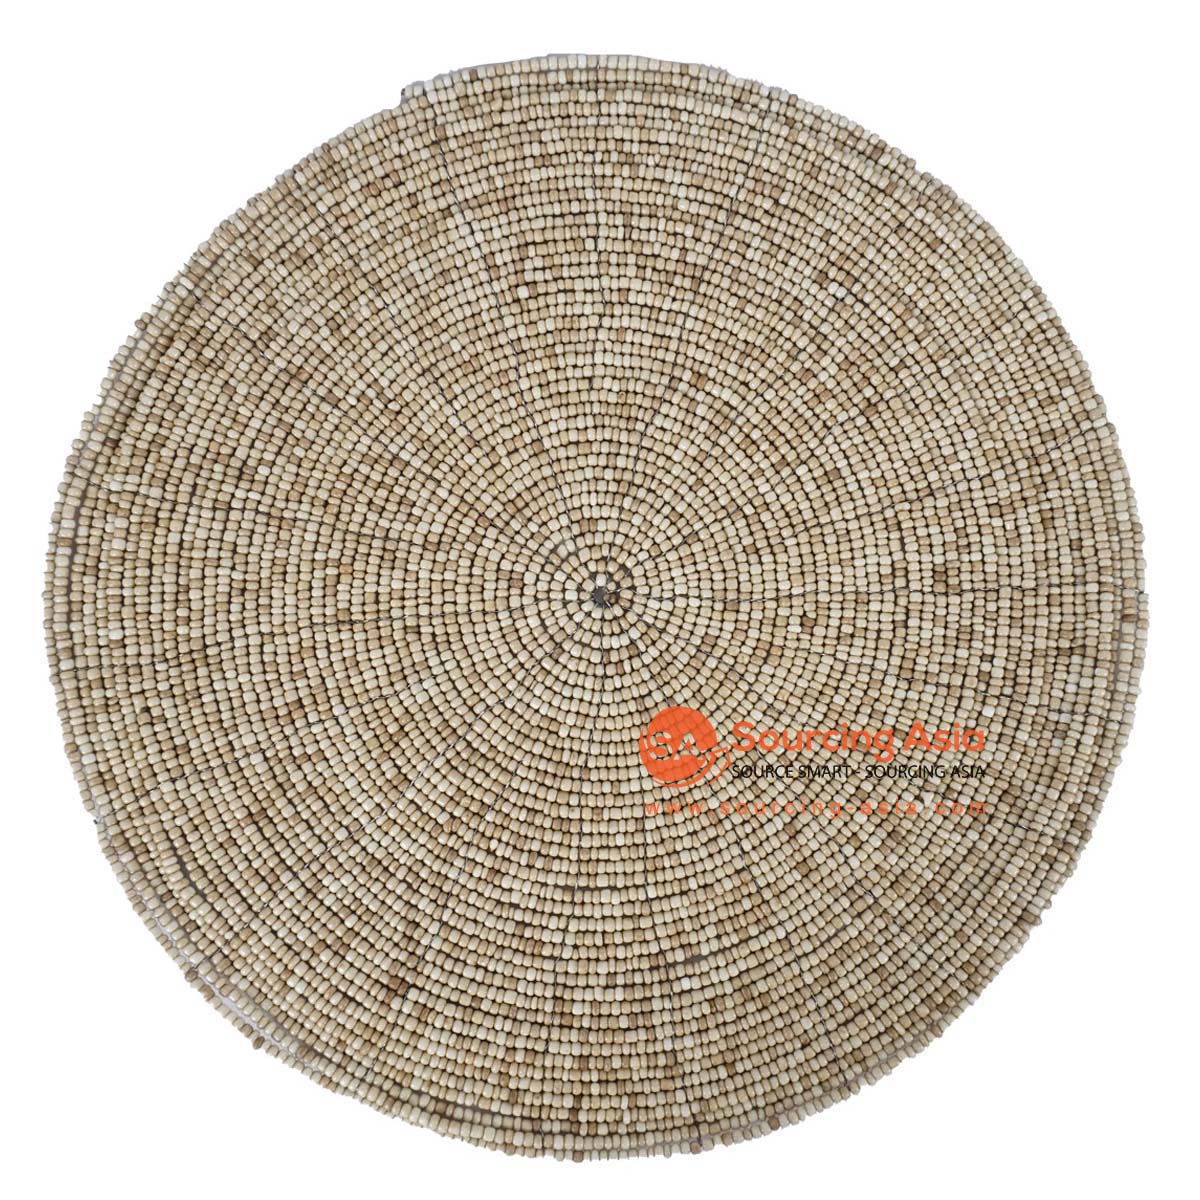 HBSC584 NATURAL BEADS ROUND PLACEMAT